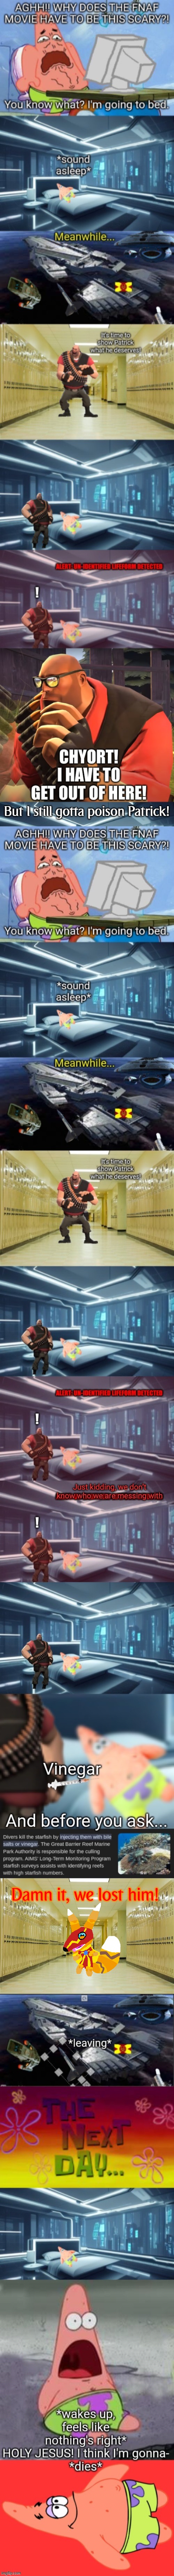 He still completed his task regardless | But I still gotta poison Patrick! Damn it, we lost him! | image tagged in high school hallway | made w/ Imgflip meme maker